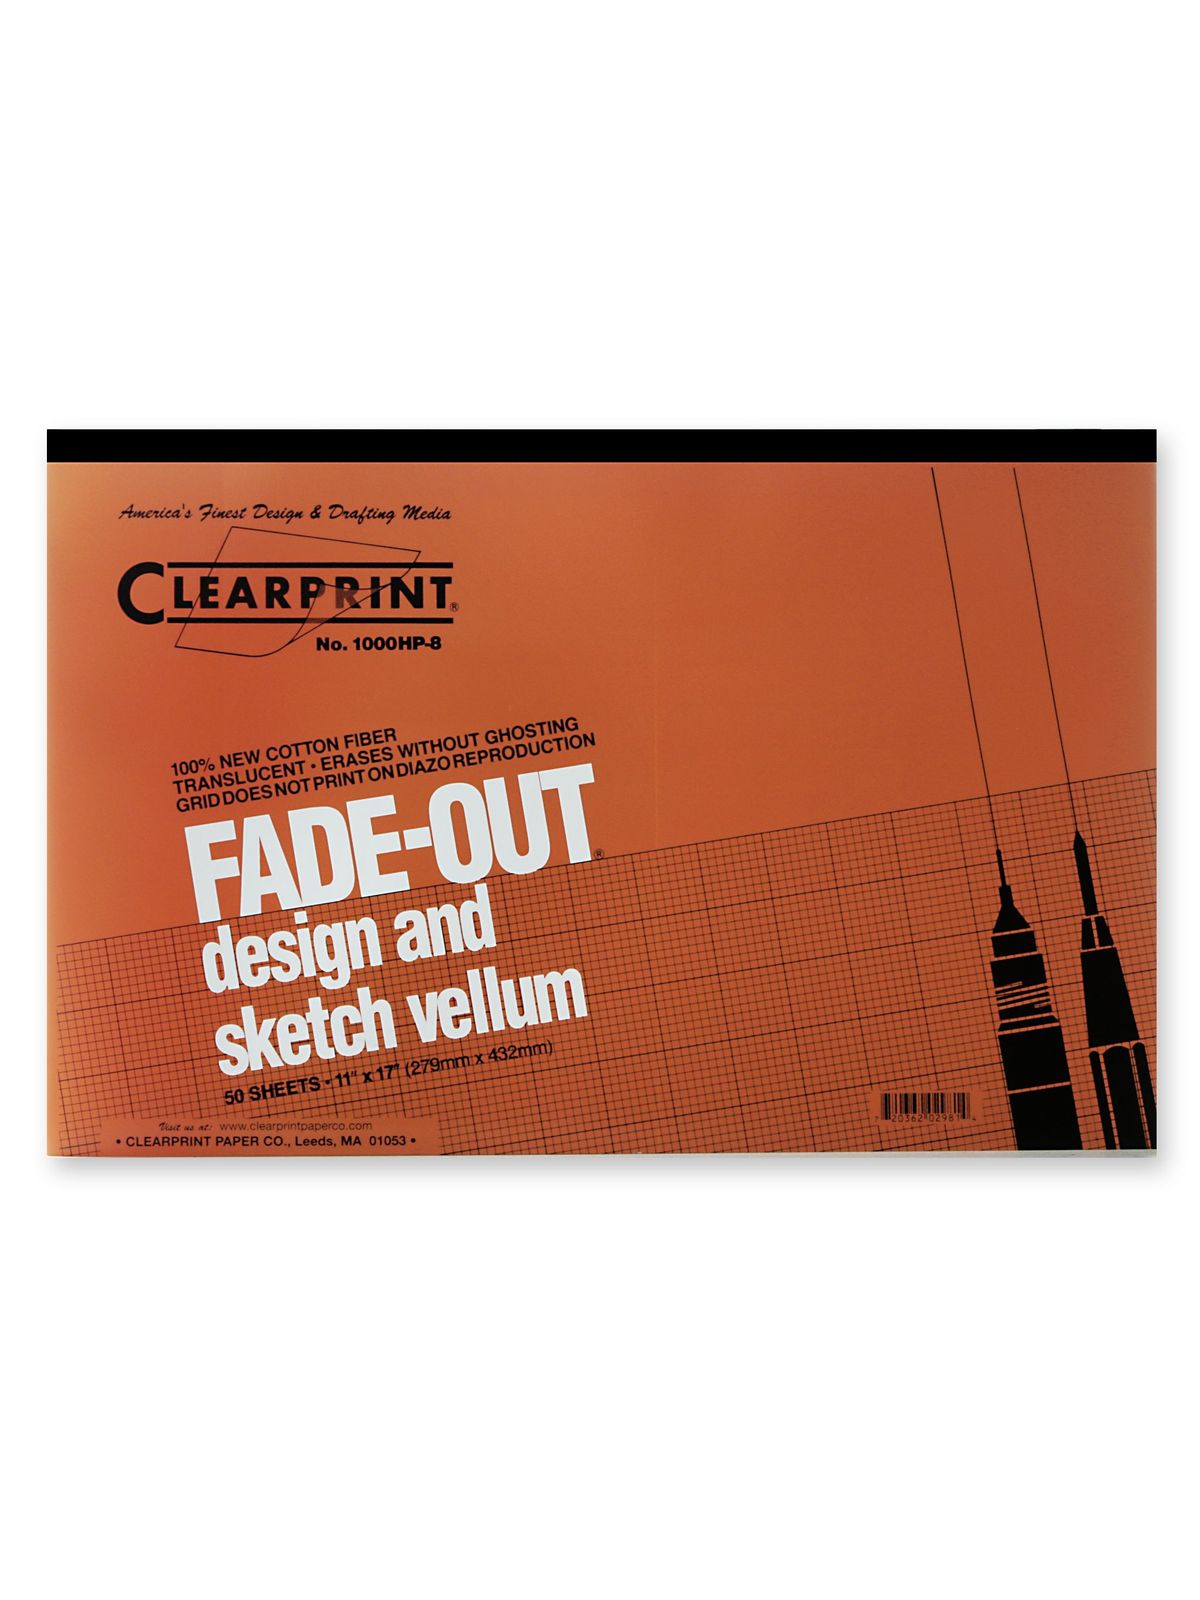 Fade-Out Design And Sketch Vellum - Grid Pad 8 X 8 11 In. X 17 In. Pad Of 50